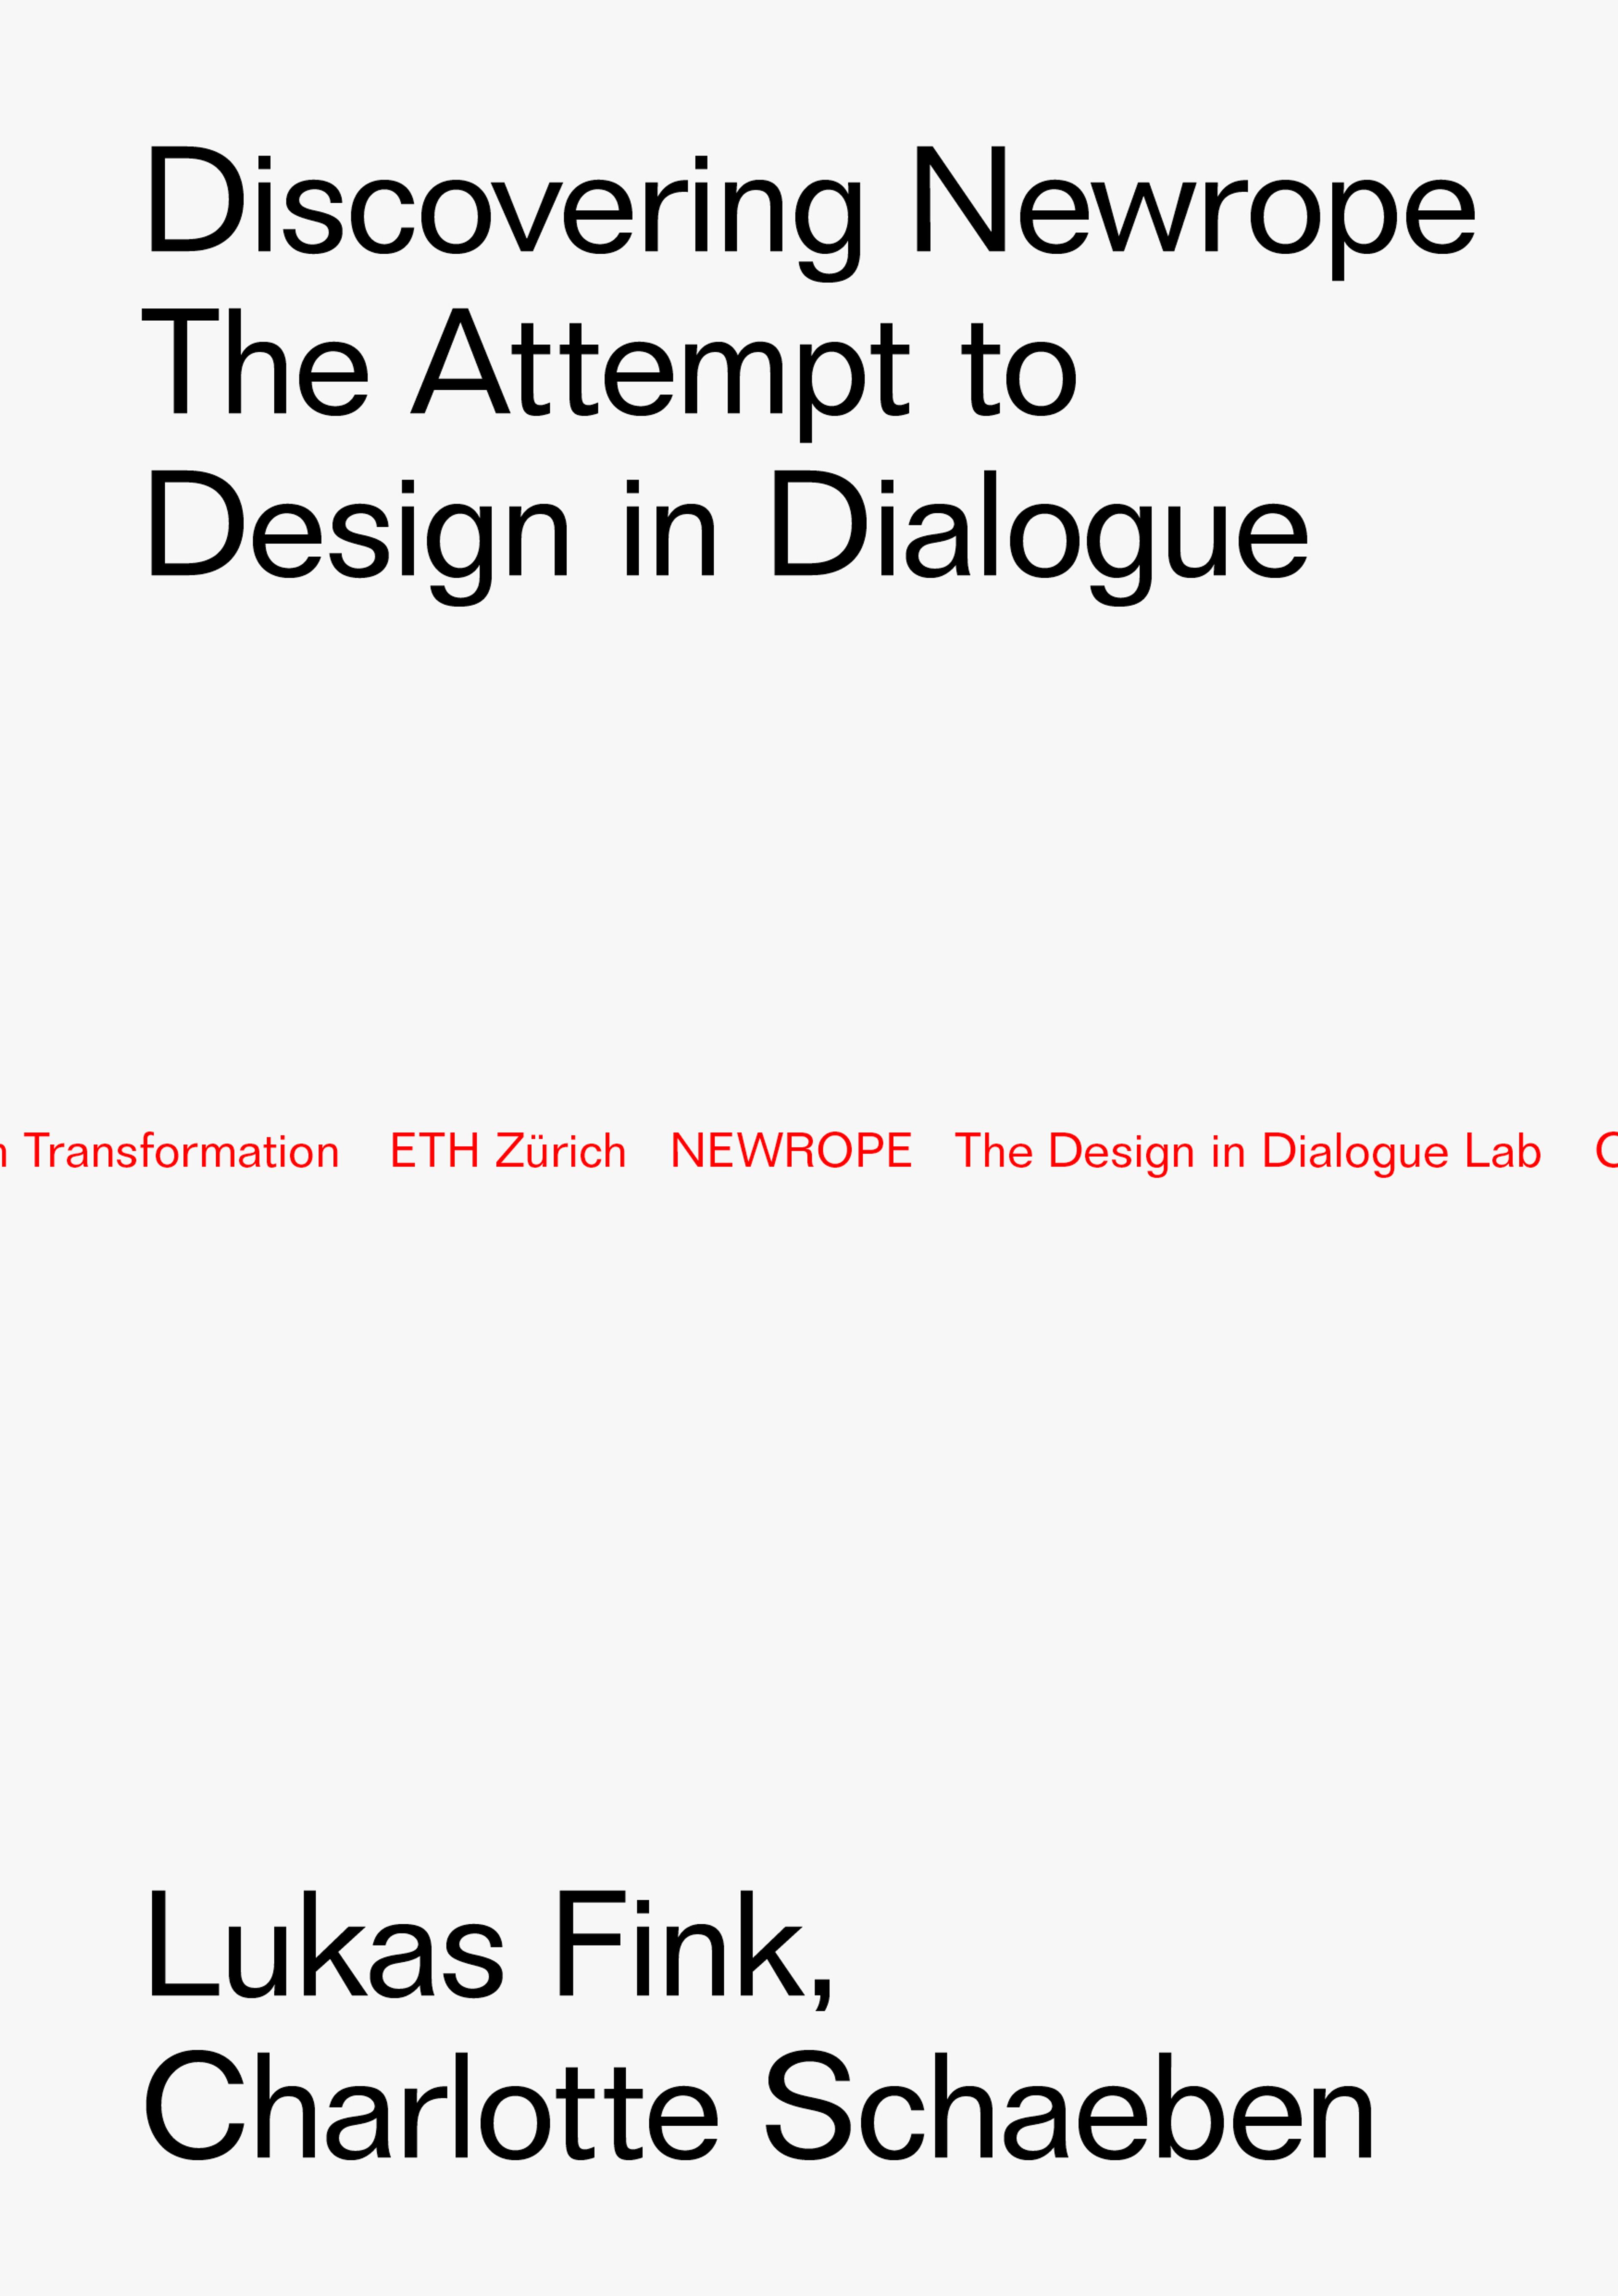 Publication: "Discovering NEWROPE – The Attempt to Design in Dialogue", Archithese Geopolitik